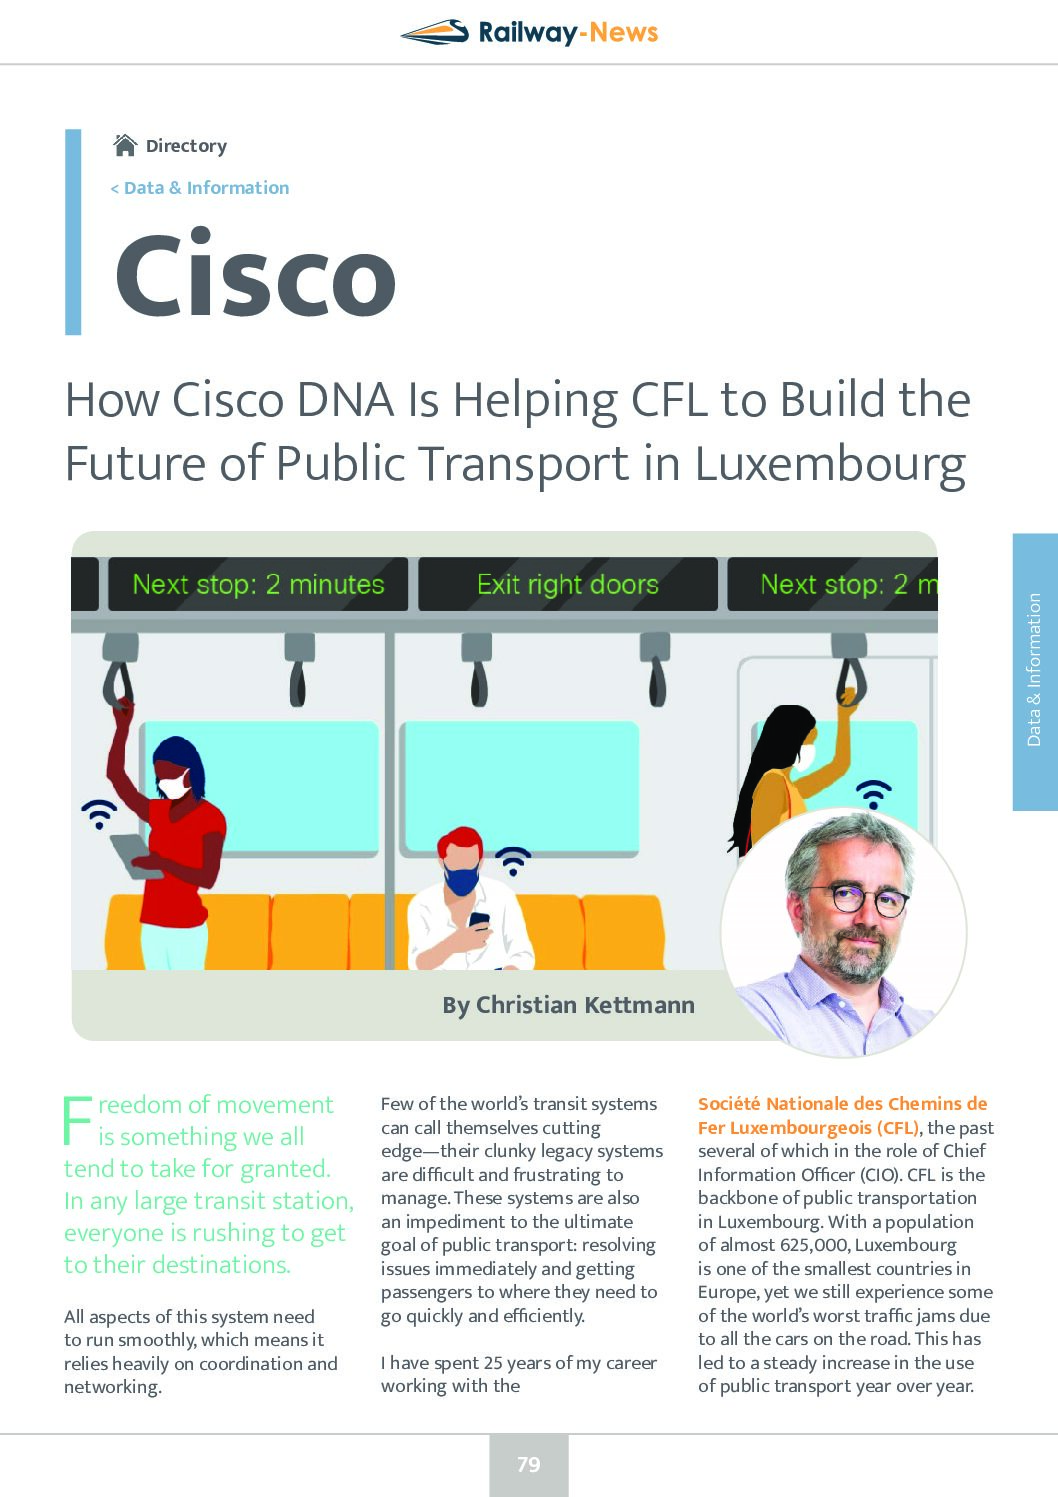 Cisco DNA Is Helping CFL to Build the Future of Public Transport